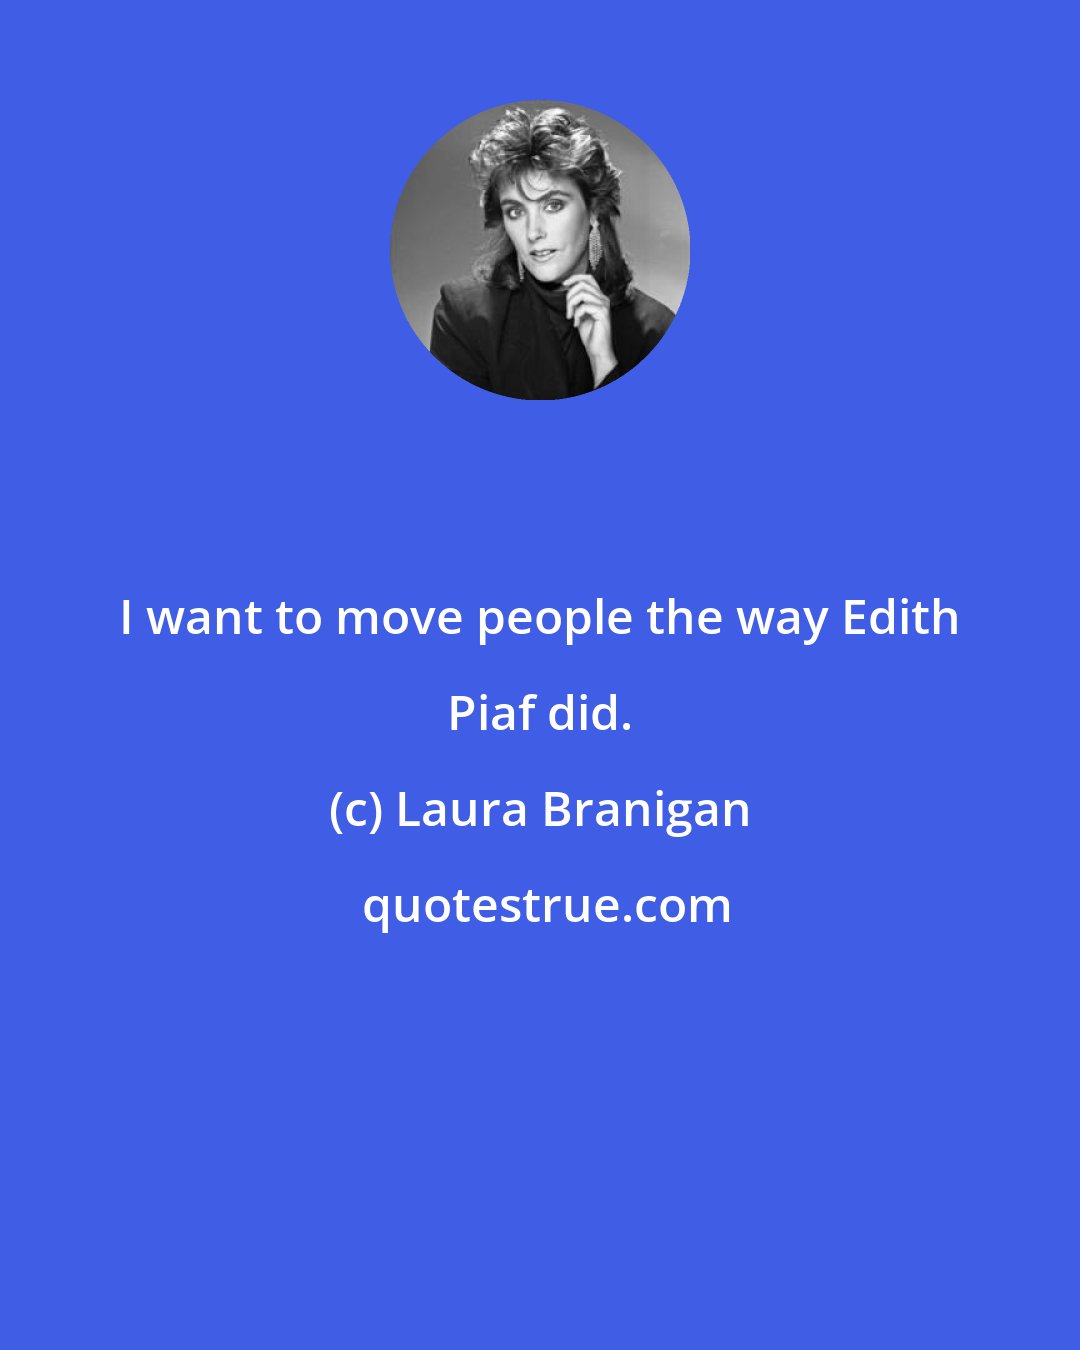 Laura Branigan: I want to move people the way Edith Piaf did.